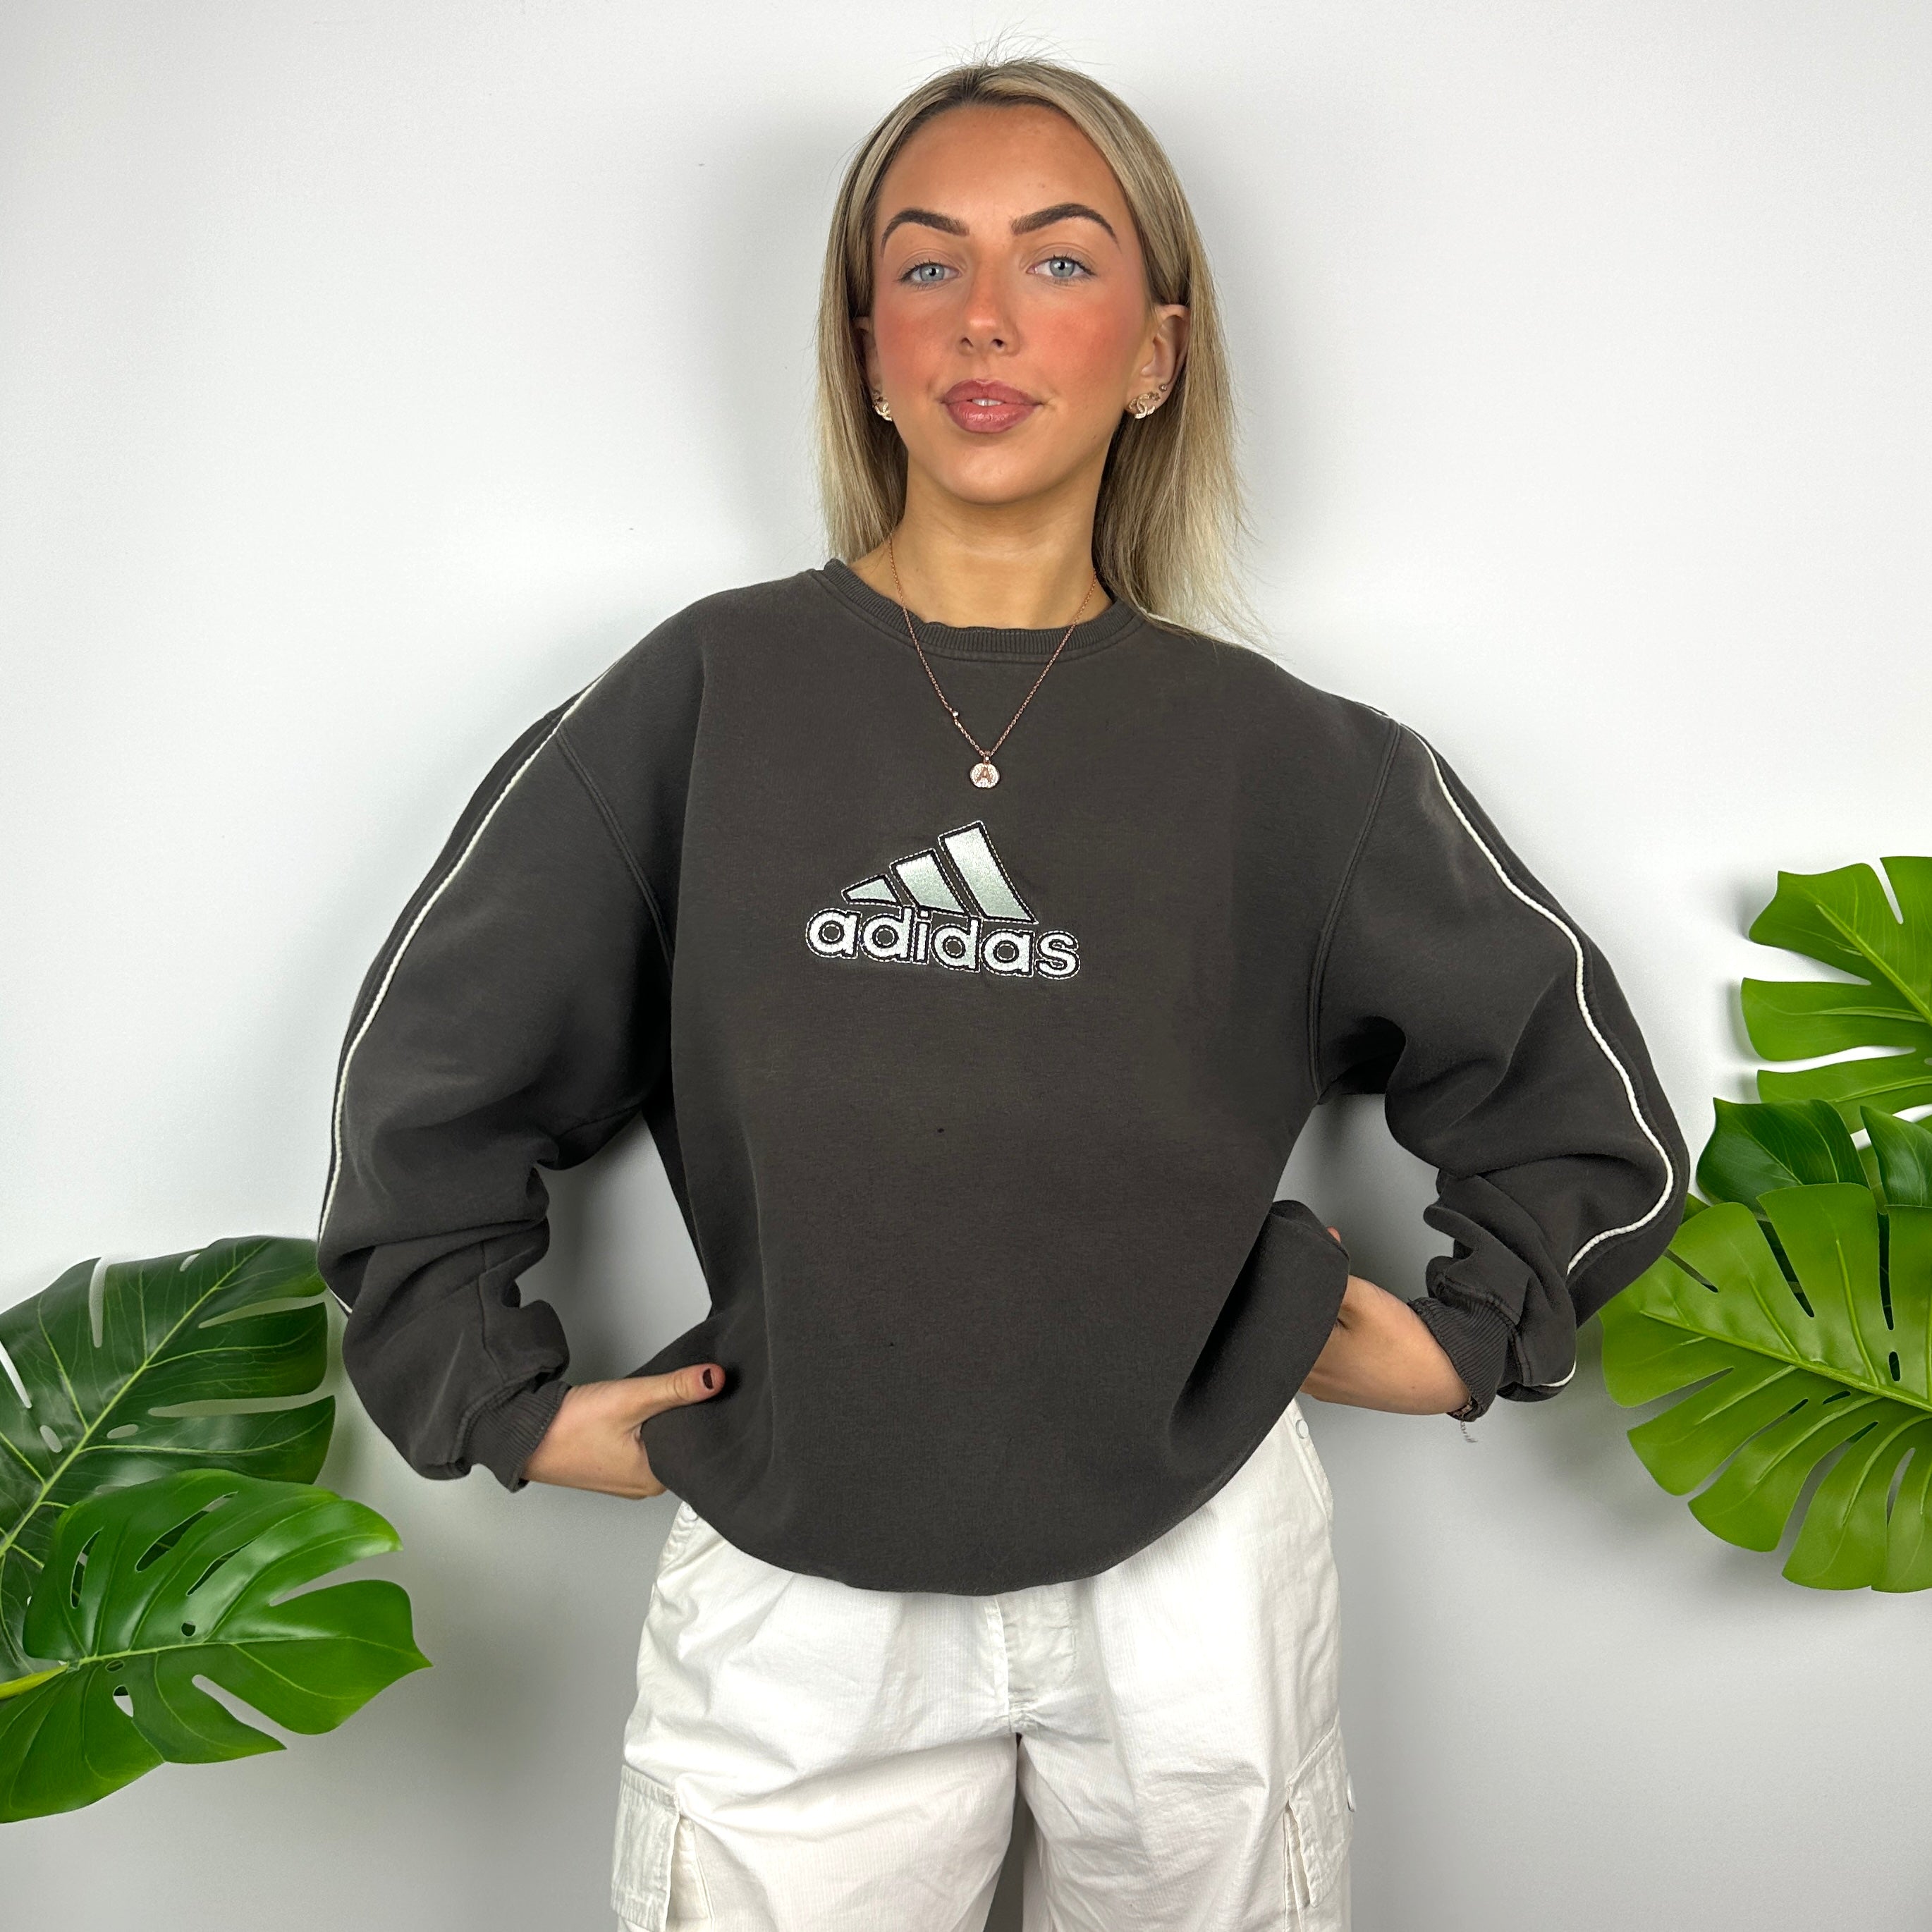 Adidas Mocha Brown Embroidered Spell Out Sweatshirt (M)